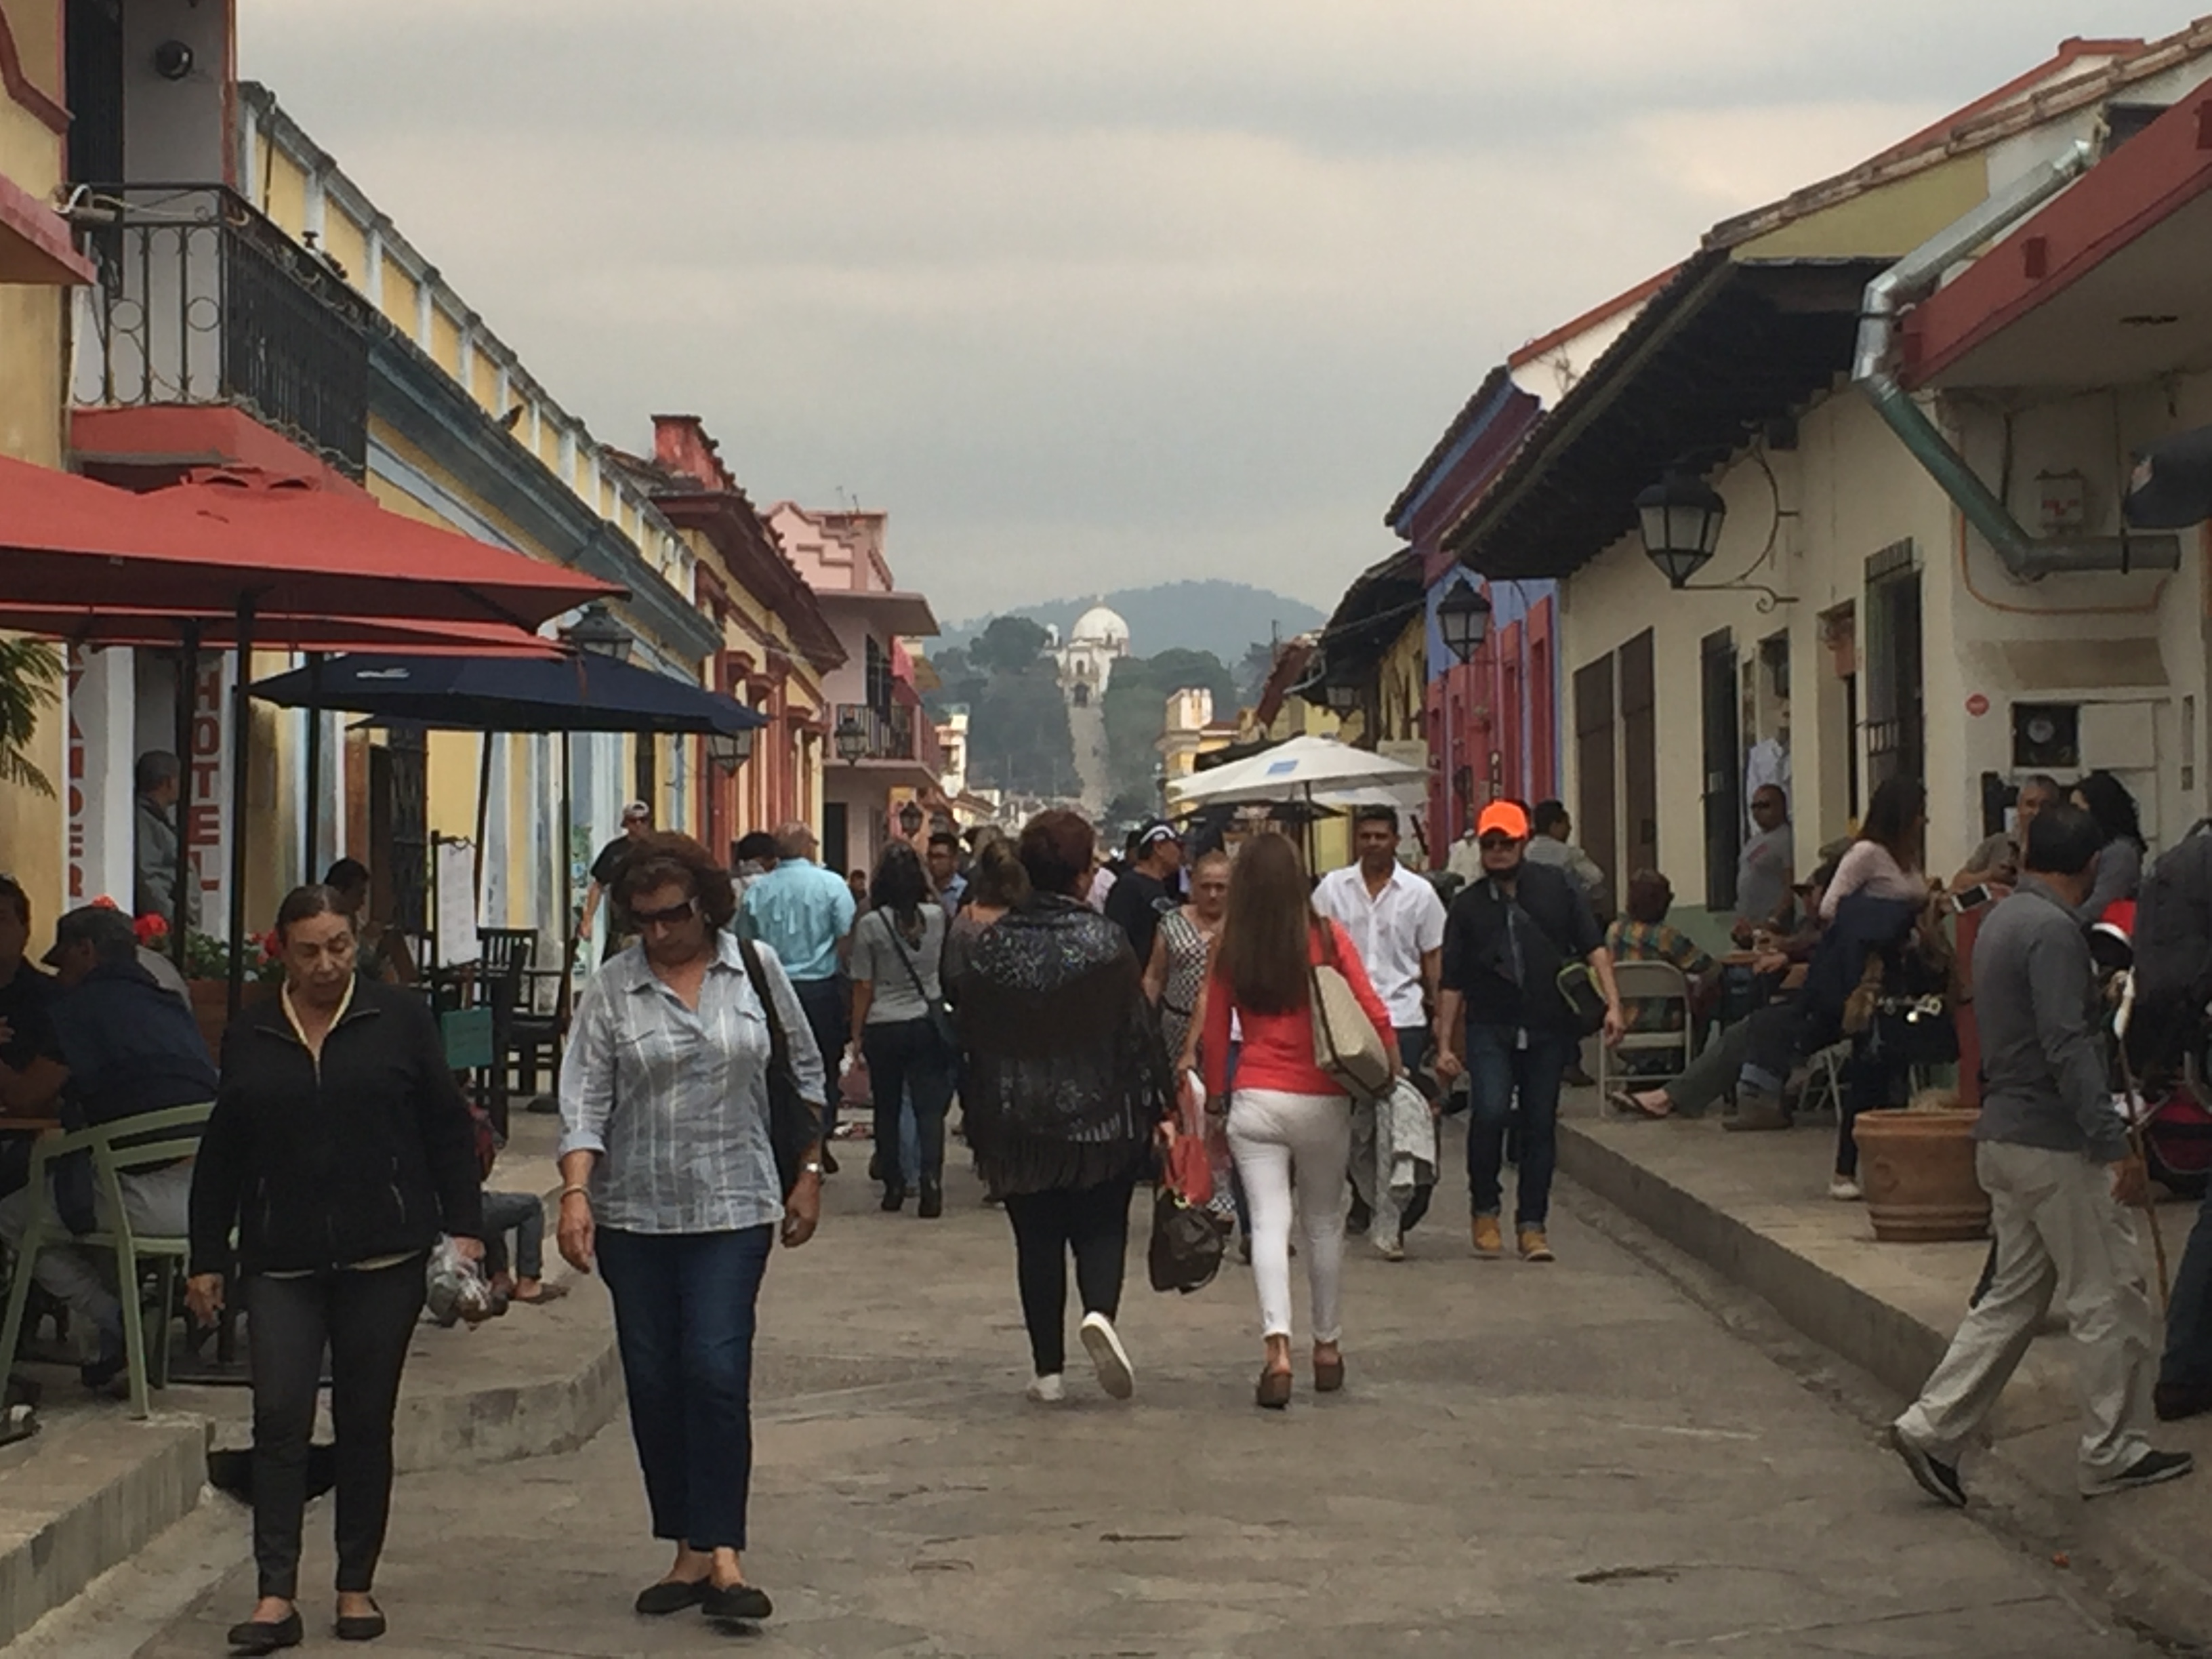 Day 29 – Back in Puerta Vieja